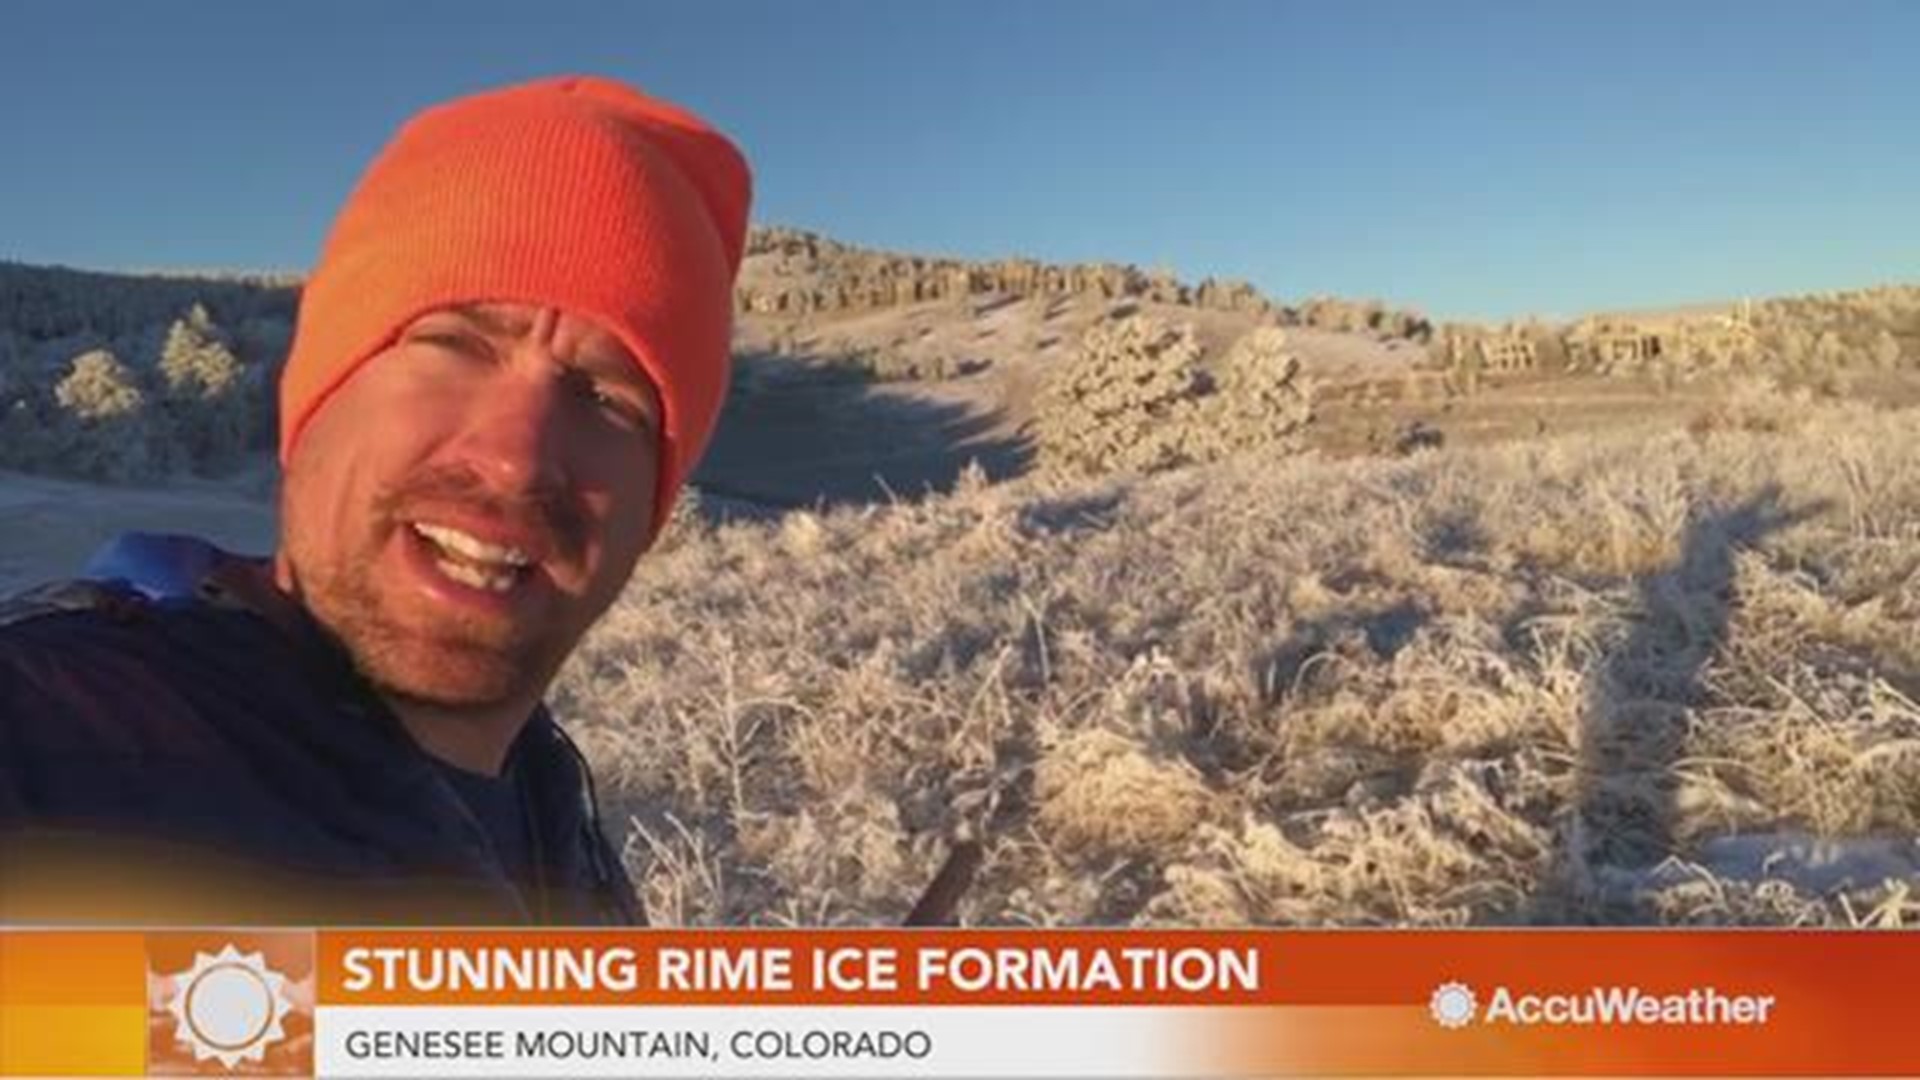 Storm chaser Reed Timmer was in Genesee Mountain just west of Denver, Colorado, where rime ice formations took place after a period of freezing fog.